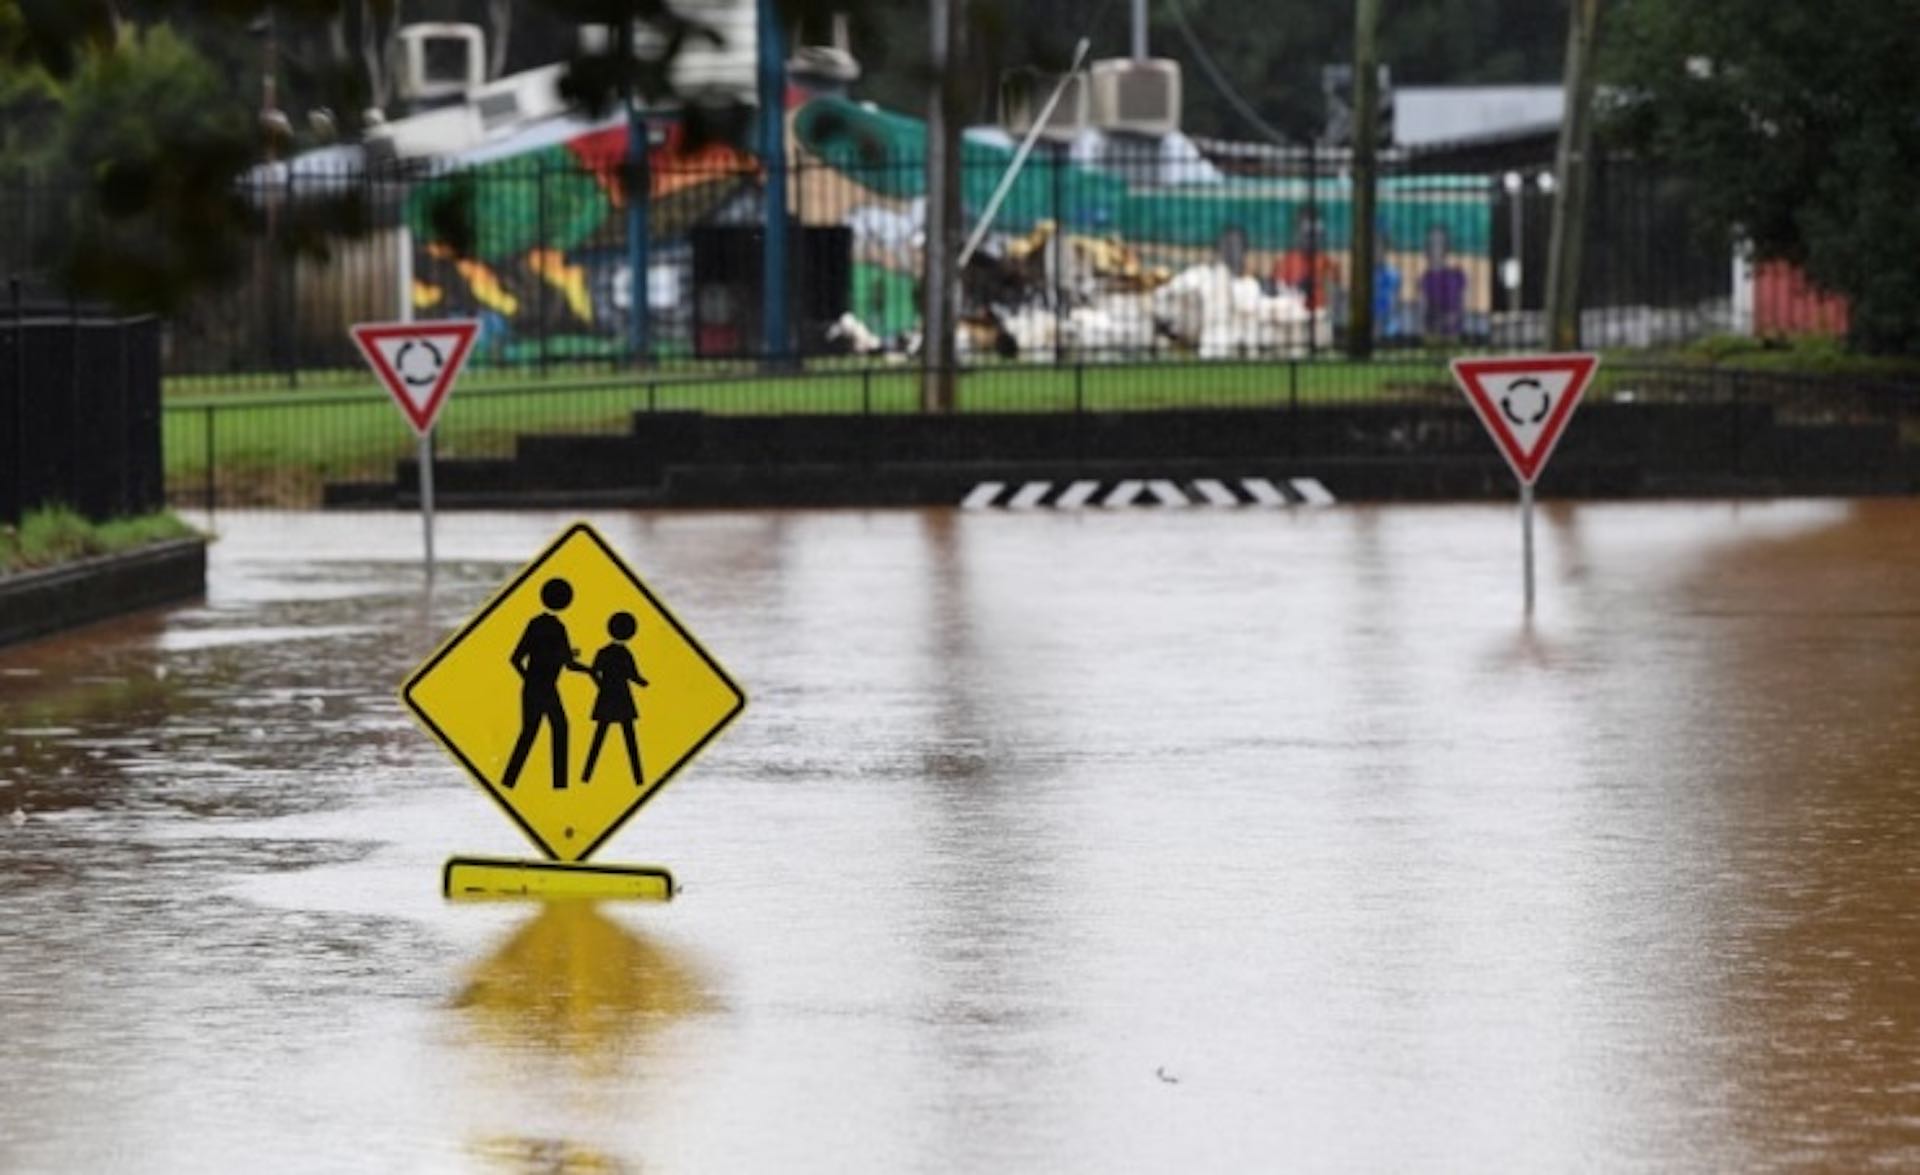 Flood waters rise in regional Australia, forcing residents to evacuate